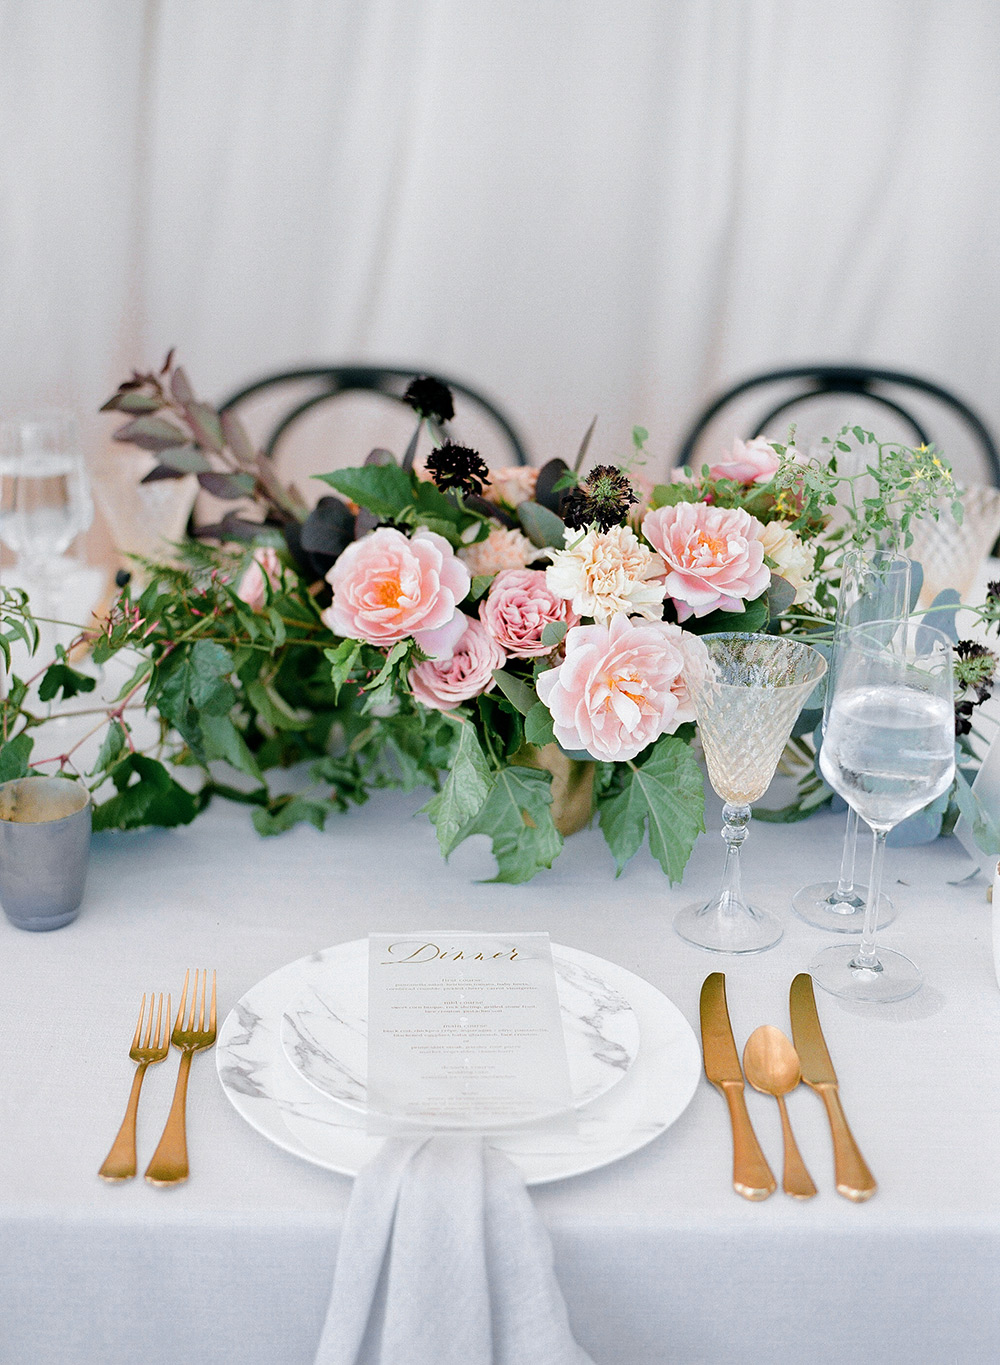 How to find the perfect vendors for your wedding with The Firefly Method